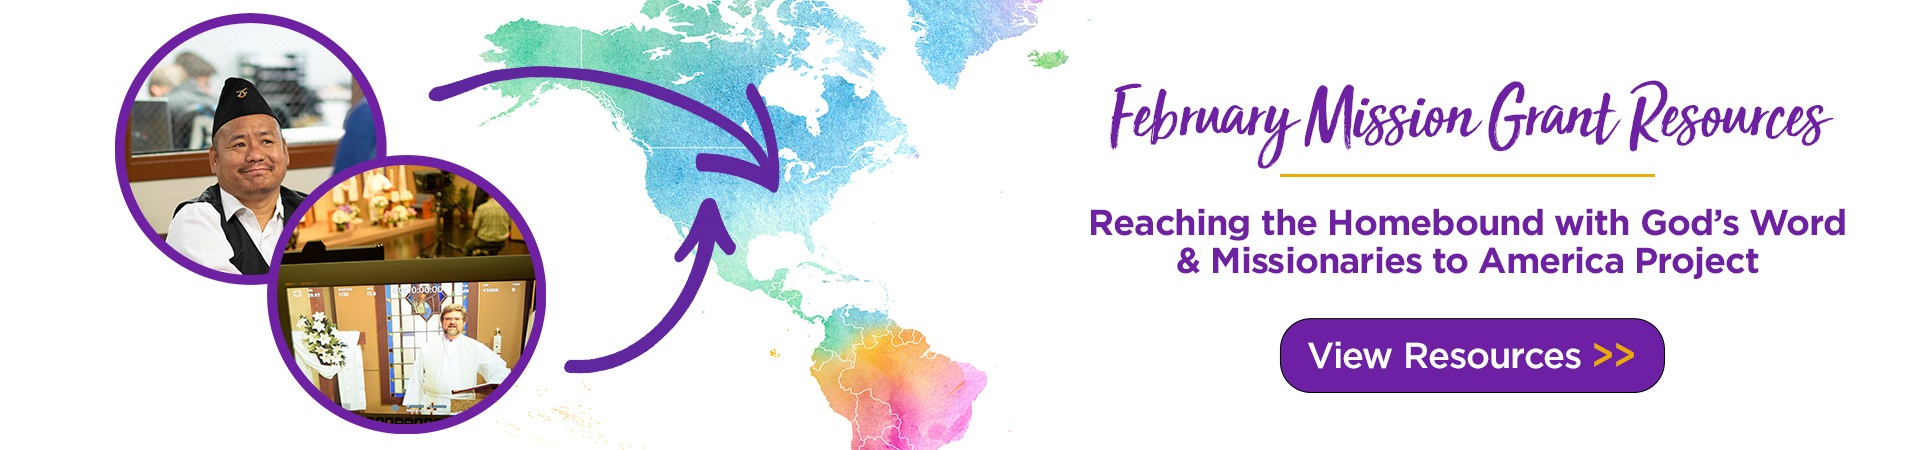 February Featured Mission Grants: Reaching the Homebound with God’s Word and Missionaries to America Project. View Resources.